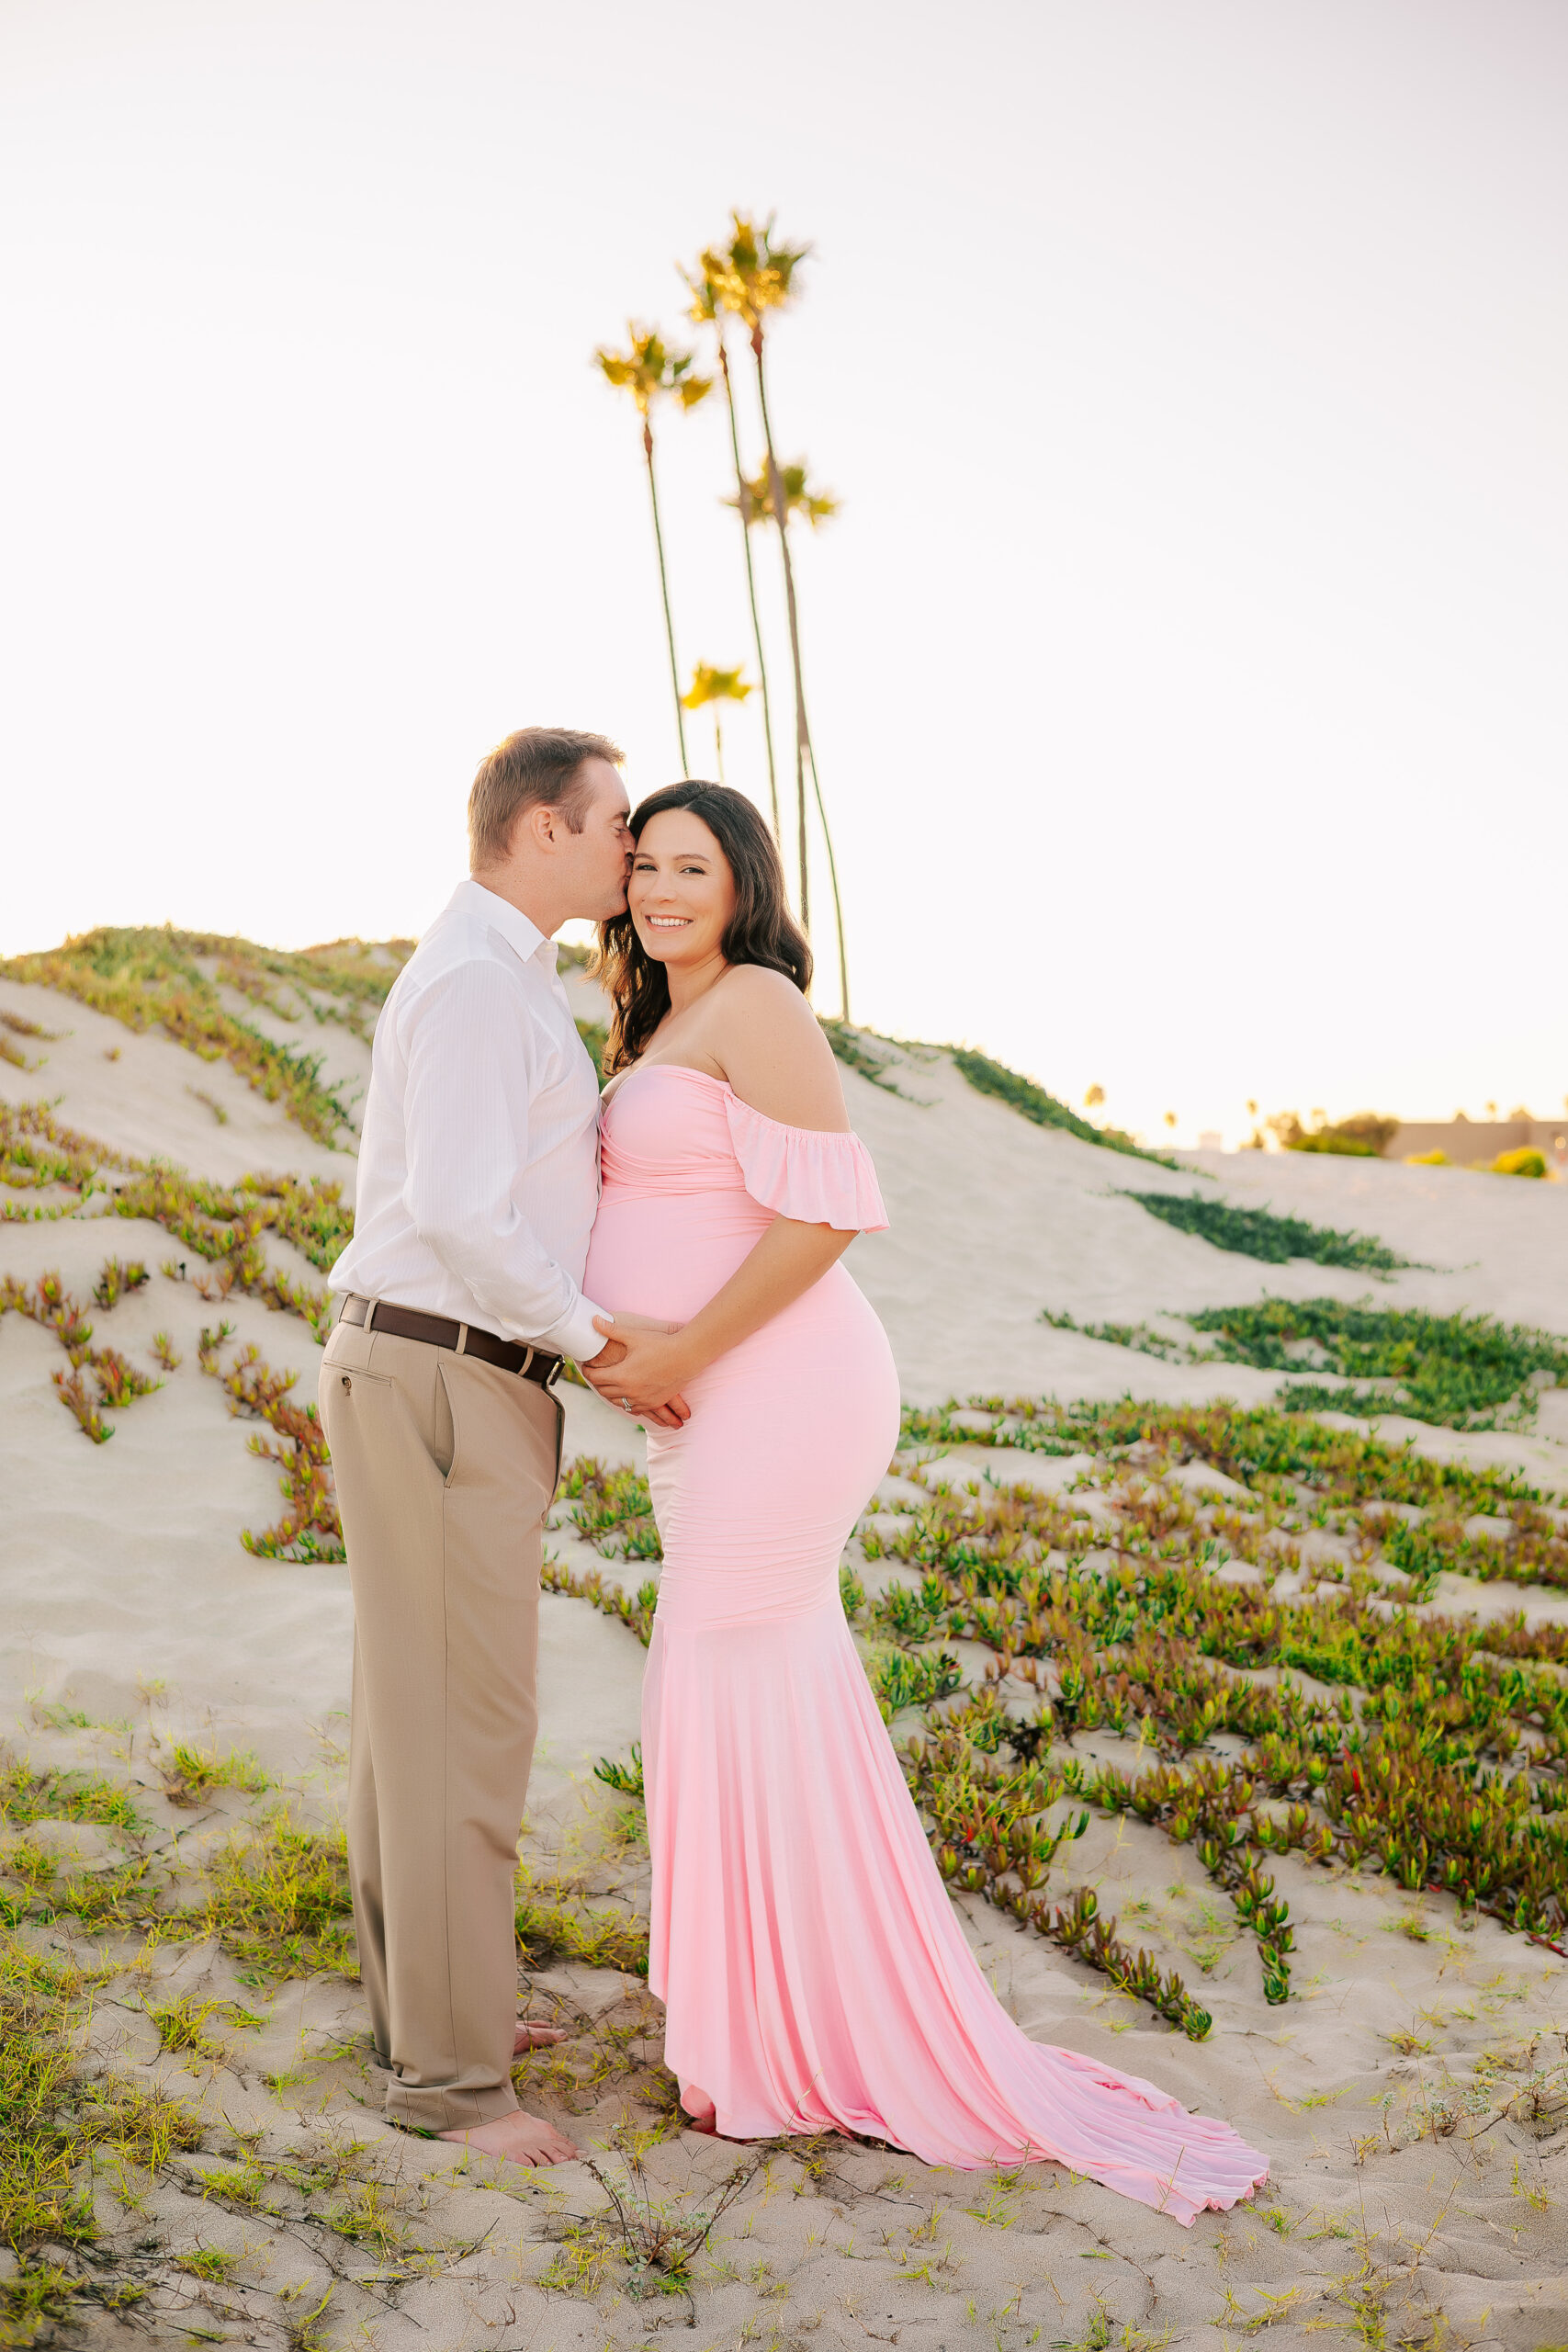 Husband kissing side of wife's head during maternity session in Seal Beach, CA by Ashley Nicole Photography.